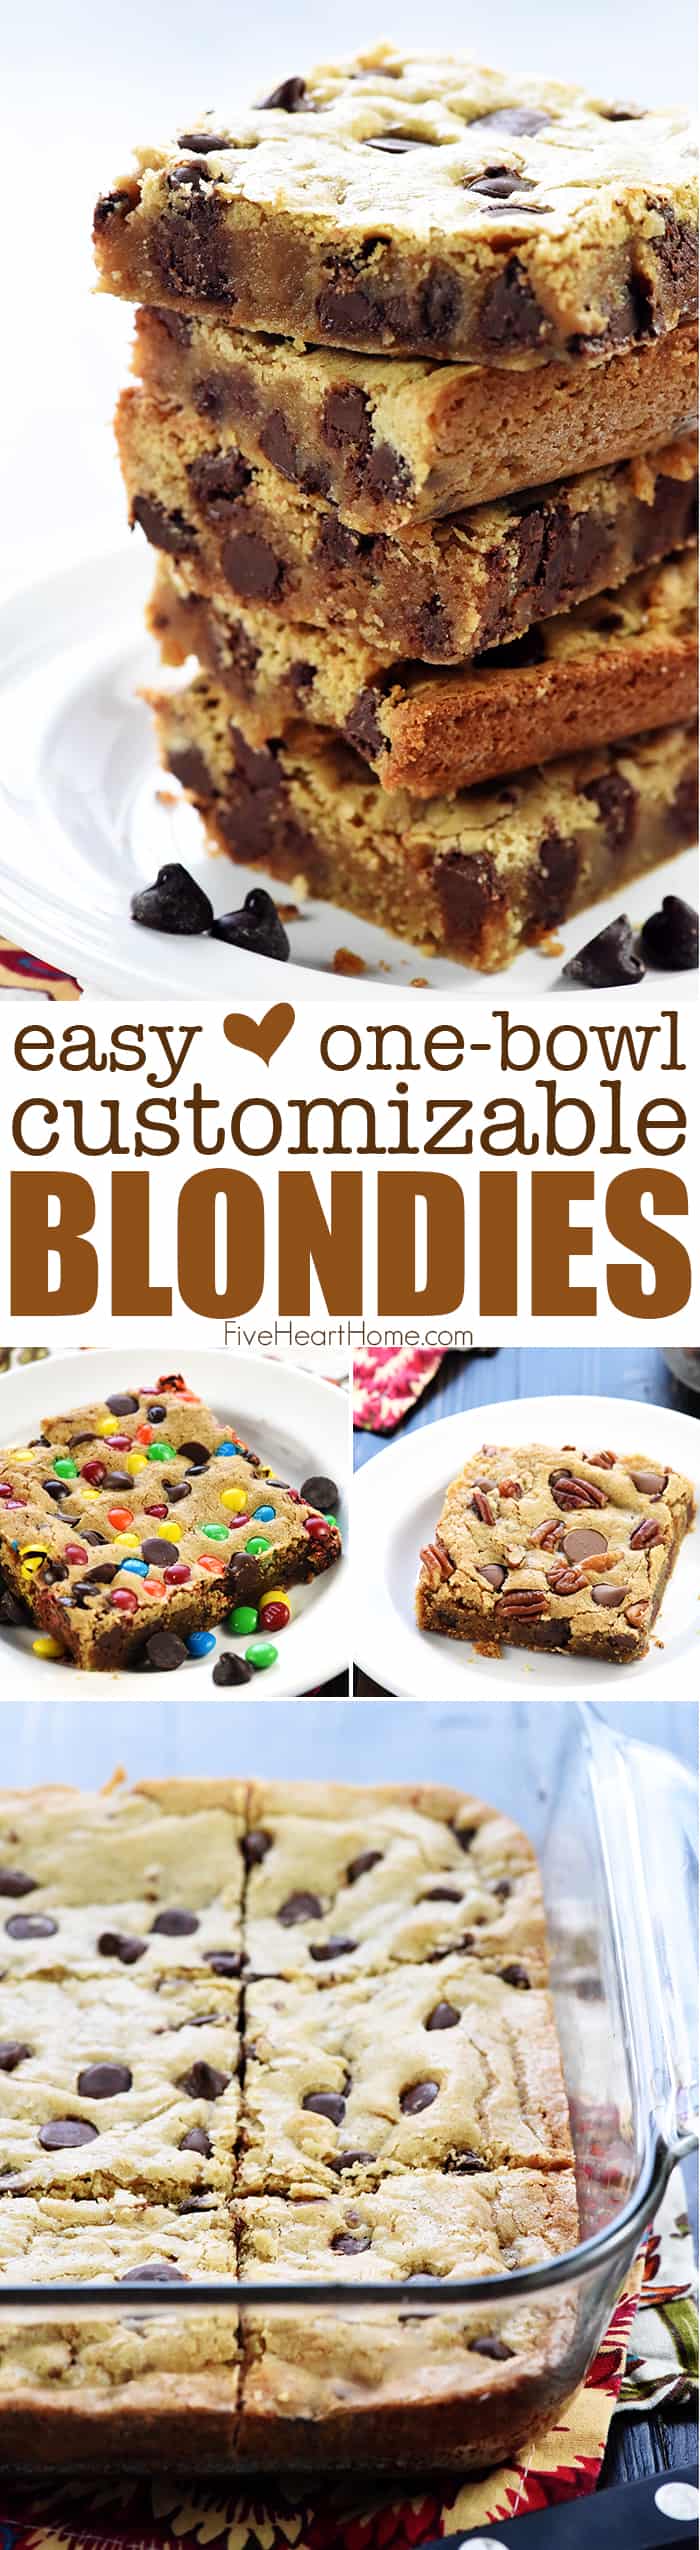 Easy One-Bowl Blondies ~ quick to make and completely customizable, loading them with anything from classic chocolate chips to your favorite chocolate candy, nuts, coconut, and more! | FiveHeartHome.com via @fivehearthome